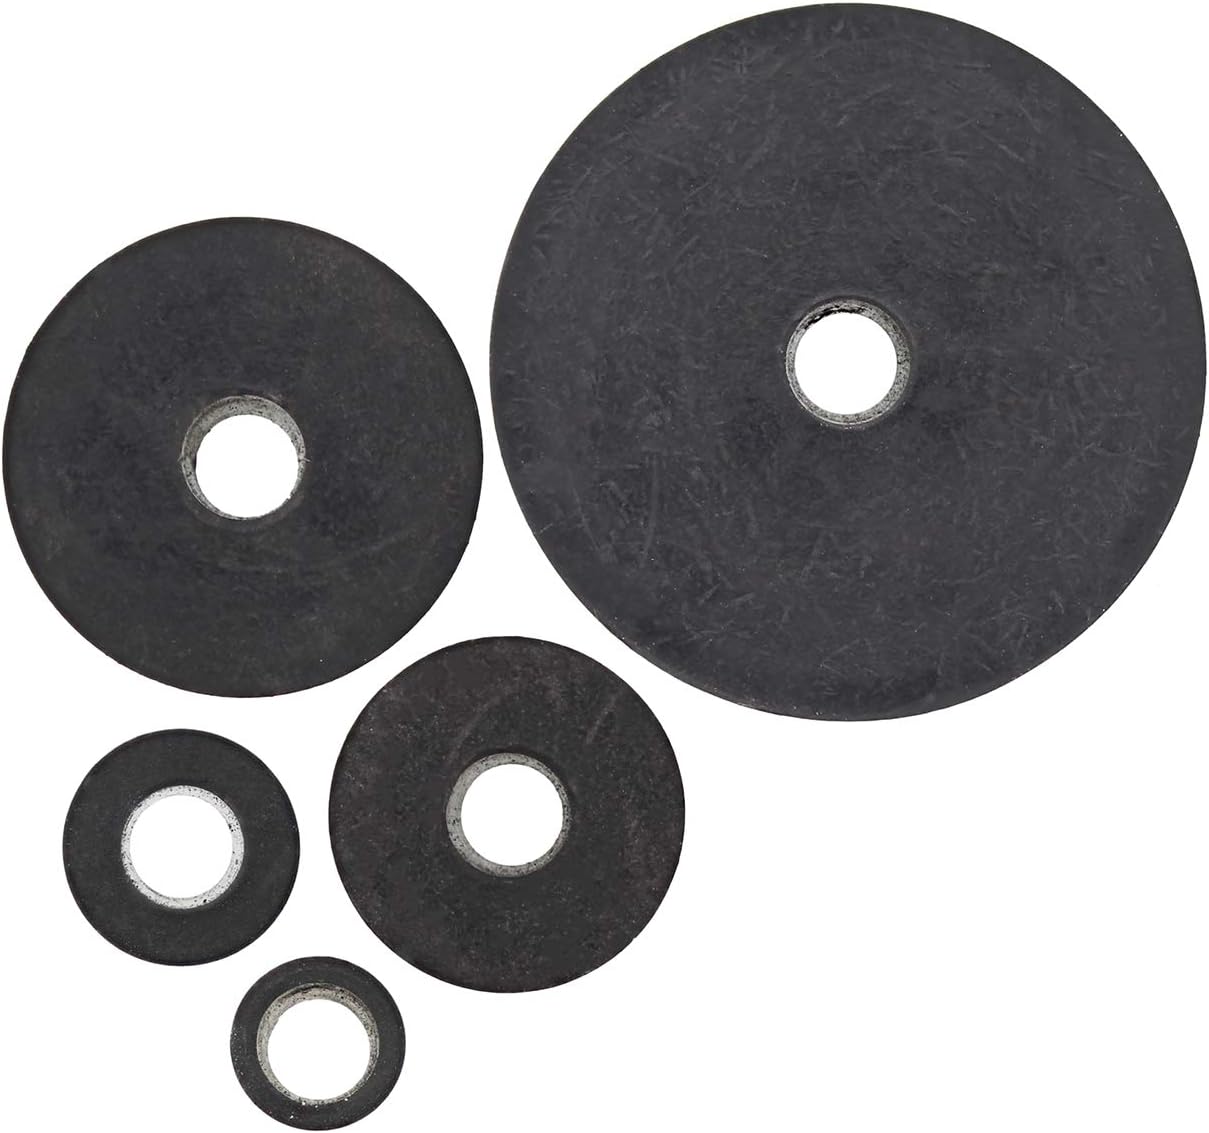 ABN Oscillating Spindle Sander Drill Press Sanding Drum Kit - 5pc Rubber Replacement Drums Kit, Sanding Sleeves